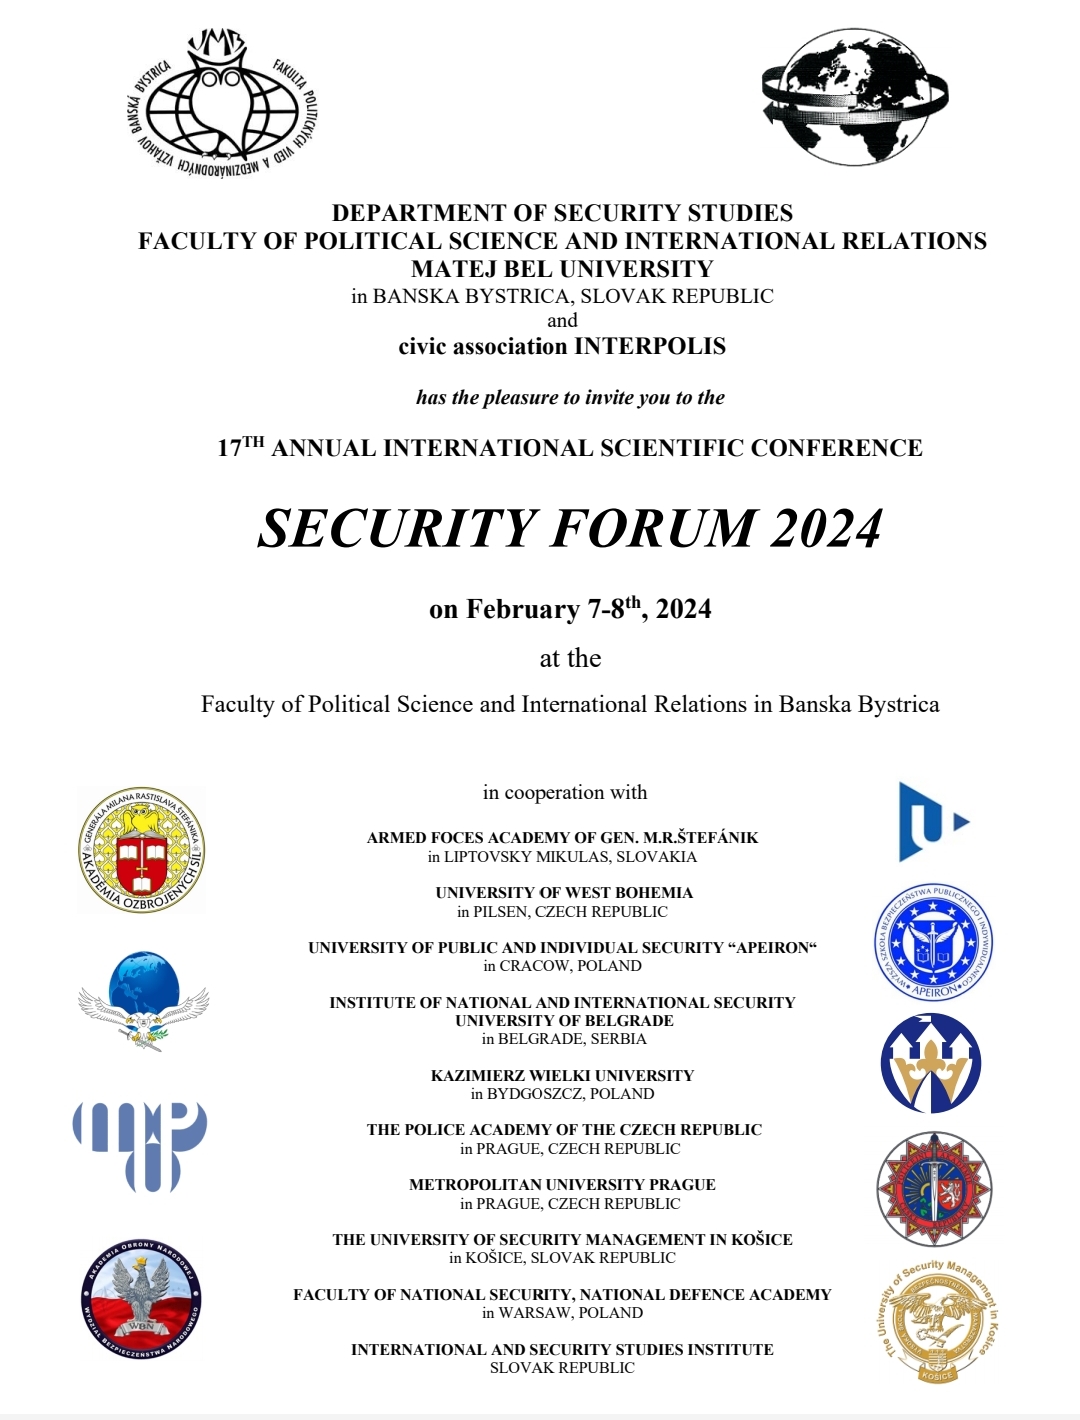 17th ANNUAL INTERNATIONAL SCIENTIFIC CONFERENCE- SECURITY FORUM 2024